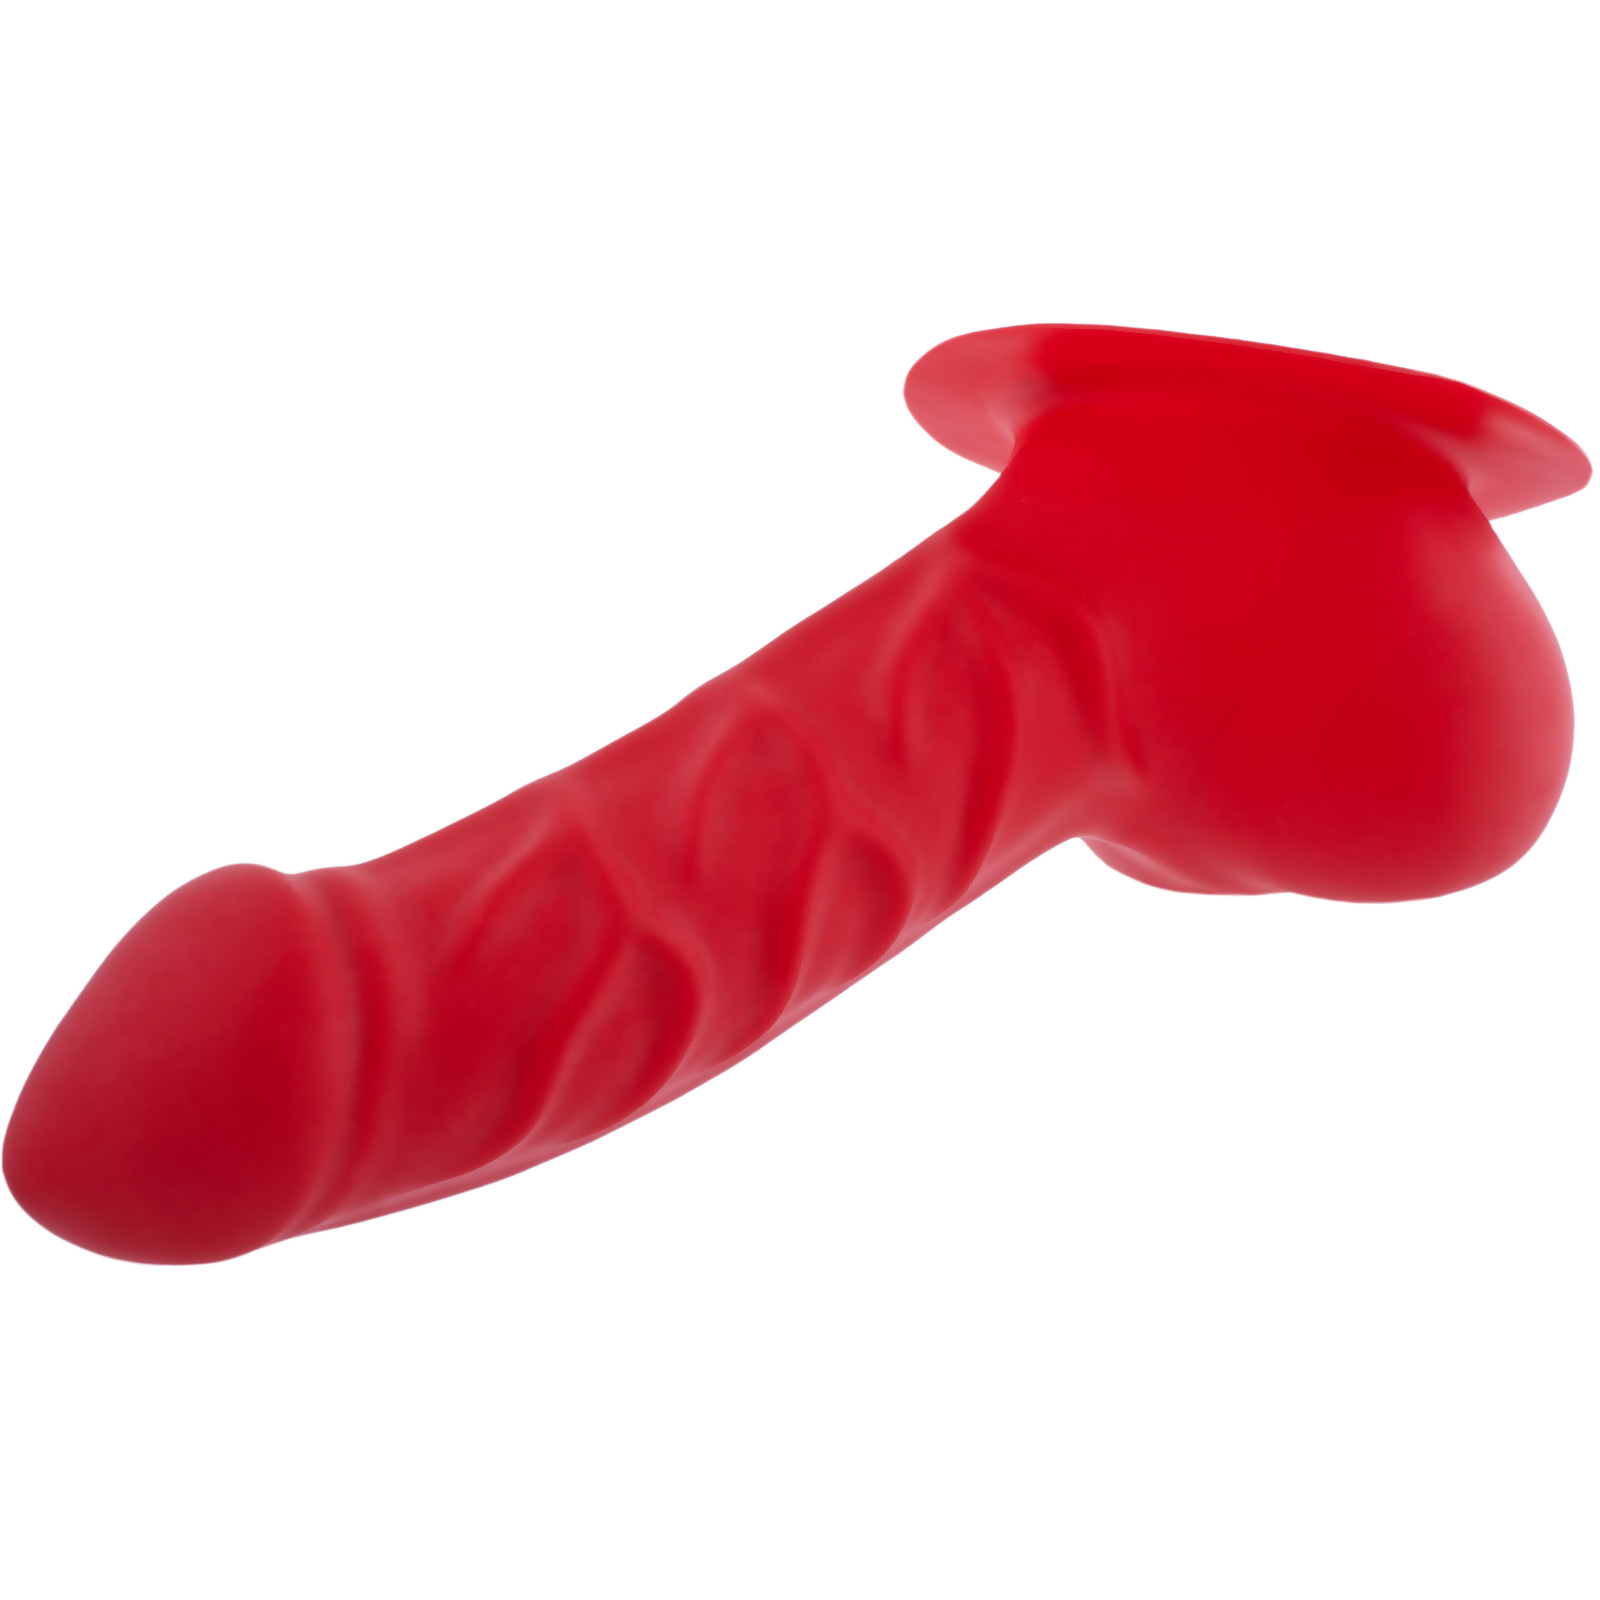 Toylie Latex Penis Sleeve «FRANZ» red, with base plate for sticking to latex clothing